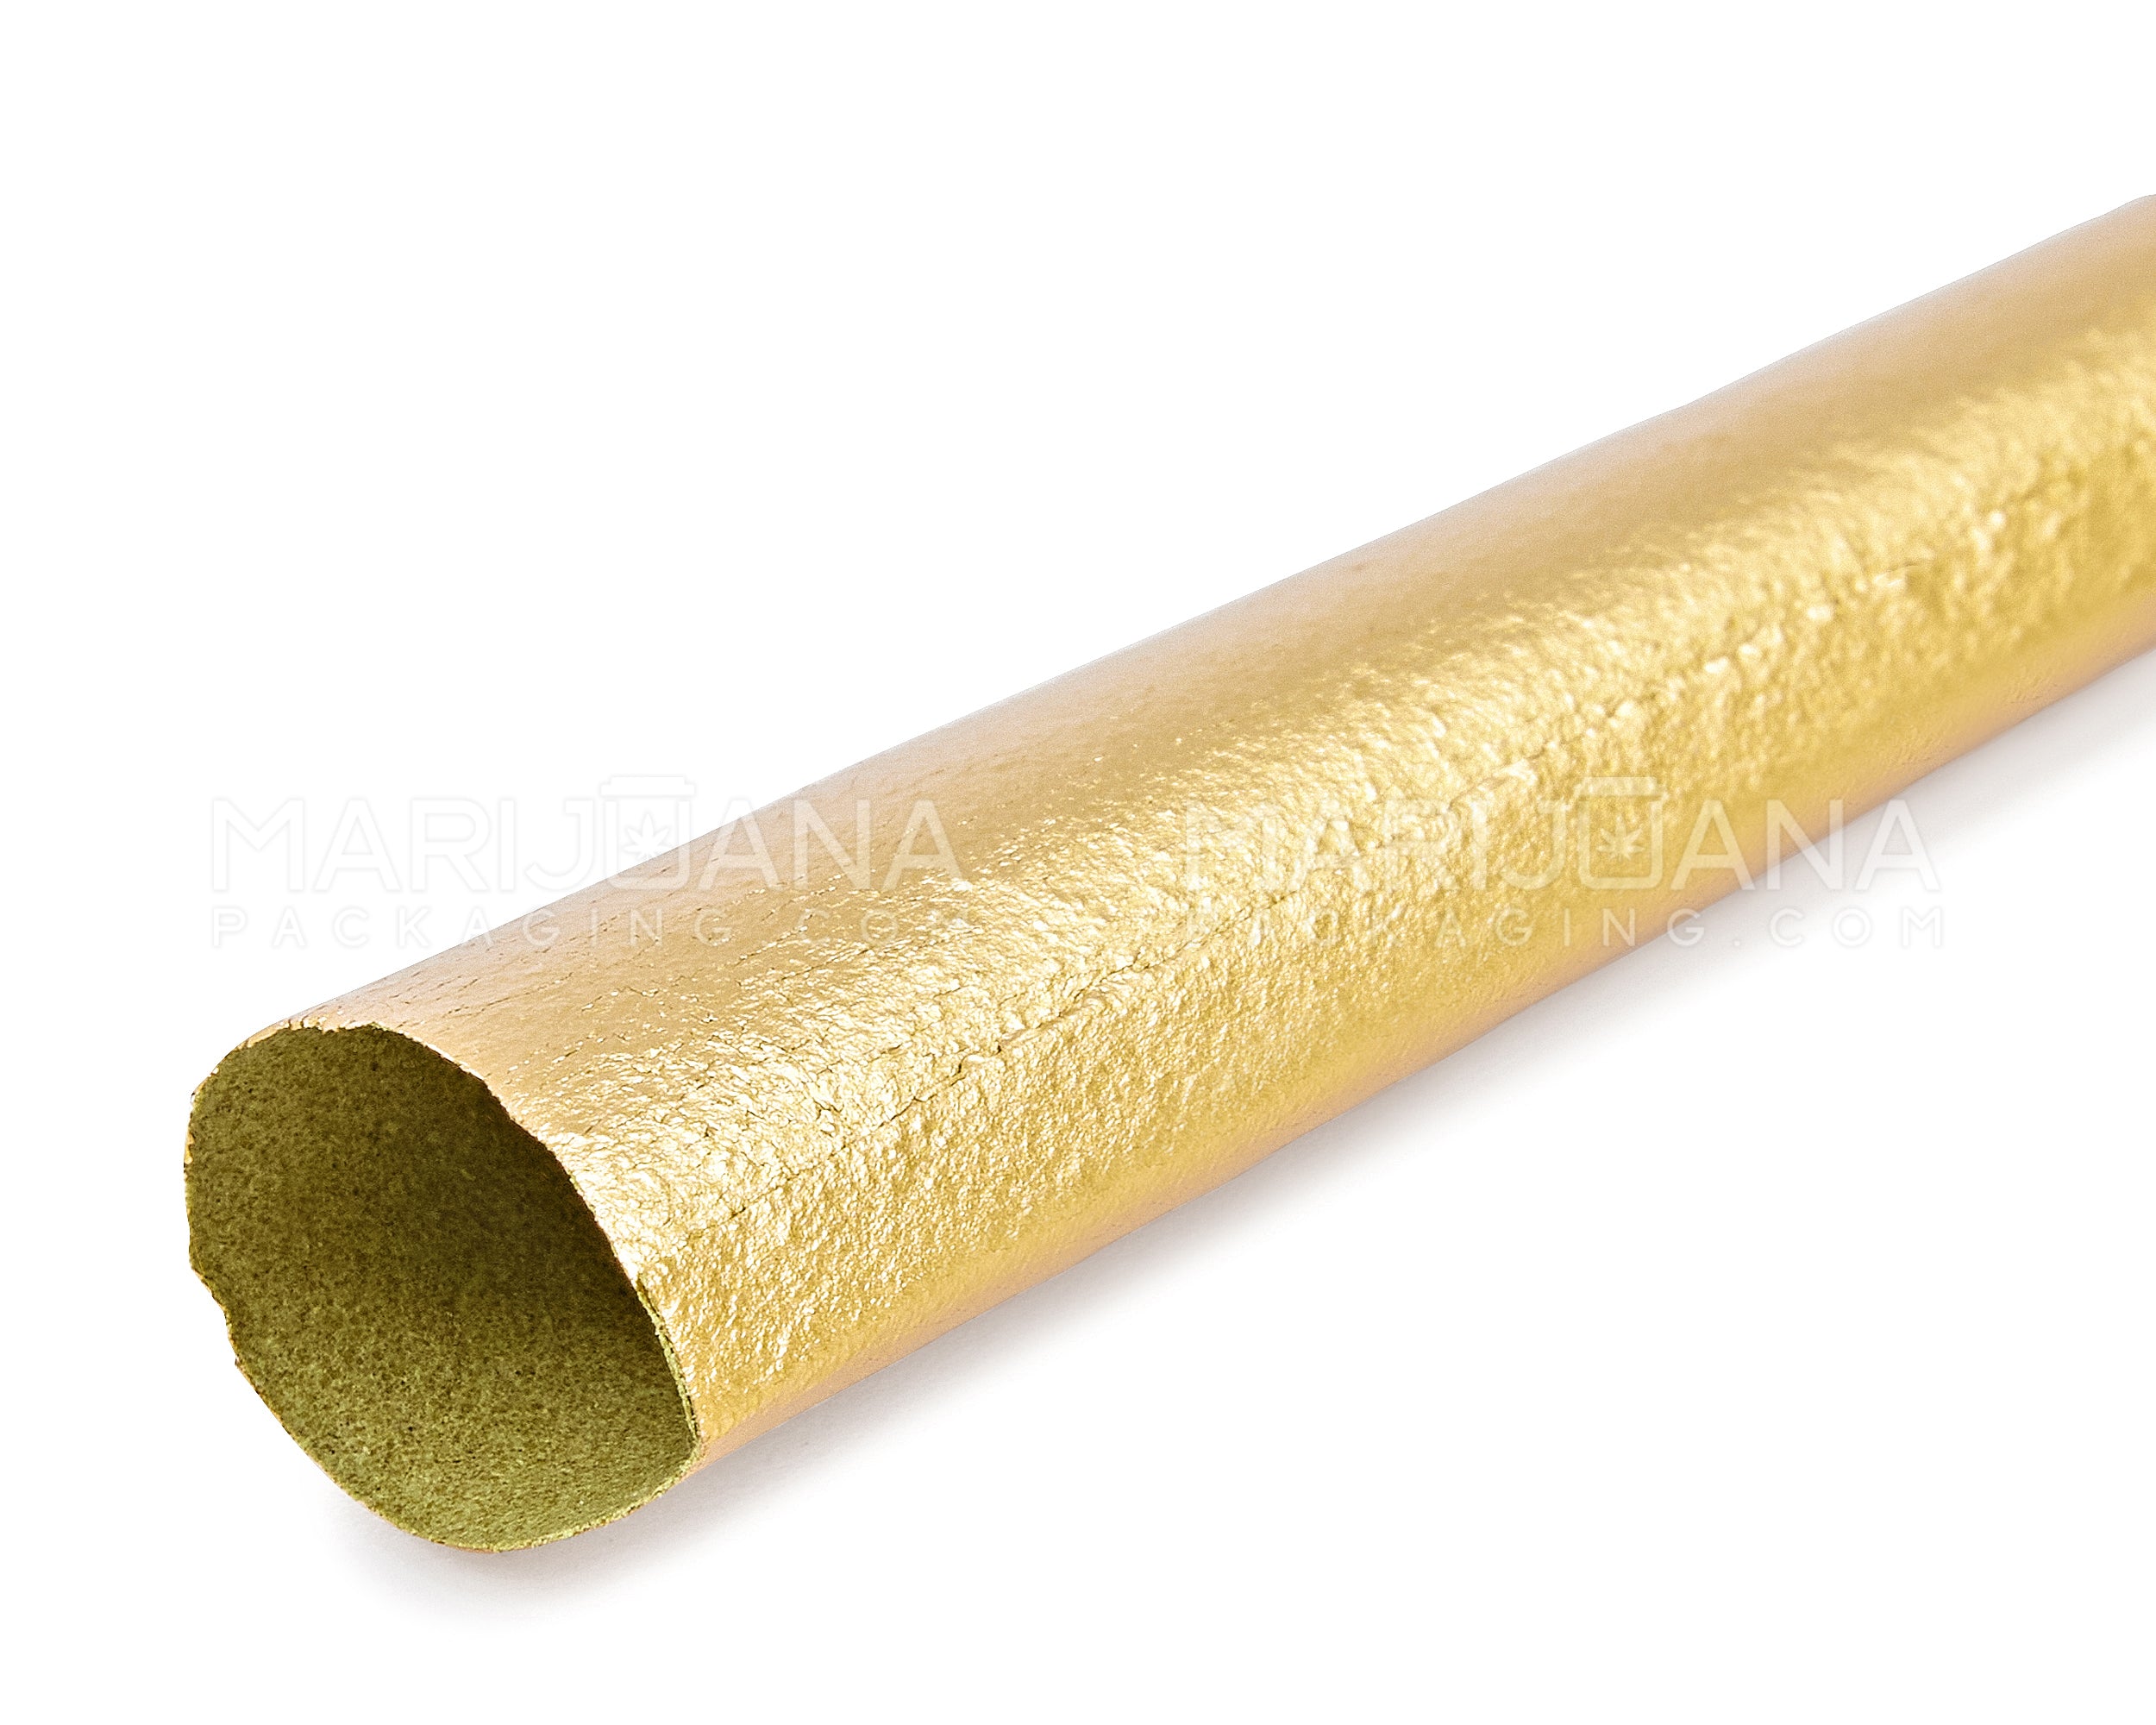 KUSH | 'Retail Display' 24K Gold King Size Hemp Pre Rolled Cones | 63mm - Edible Gold - 8 Count - 4